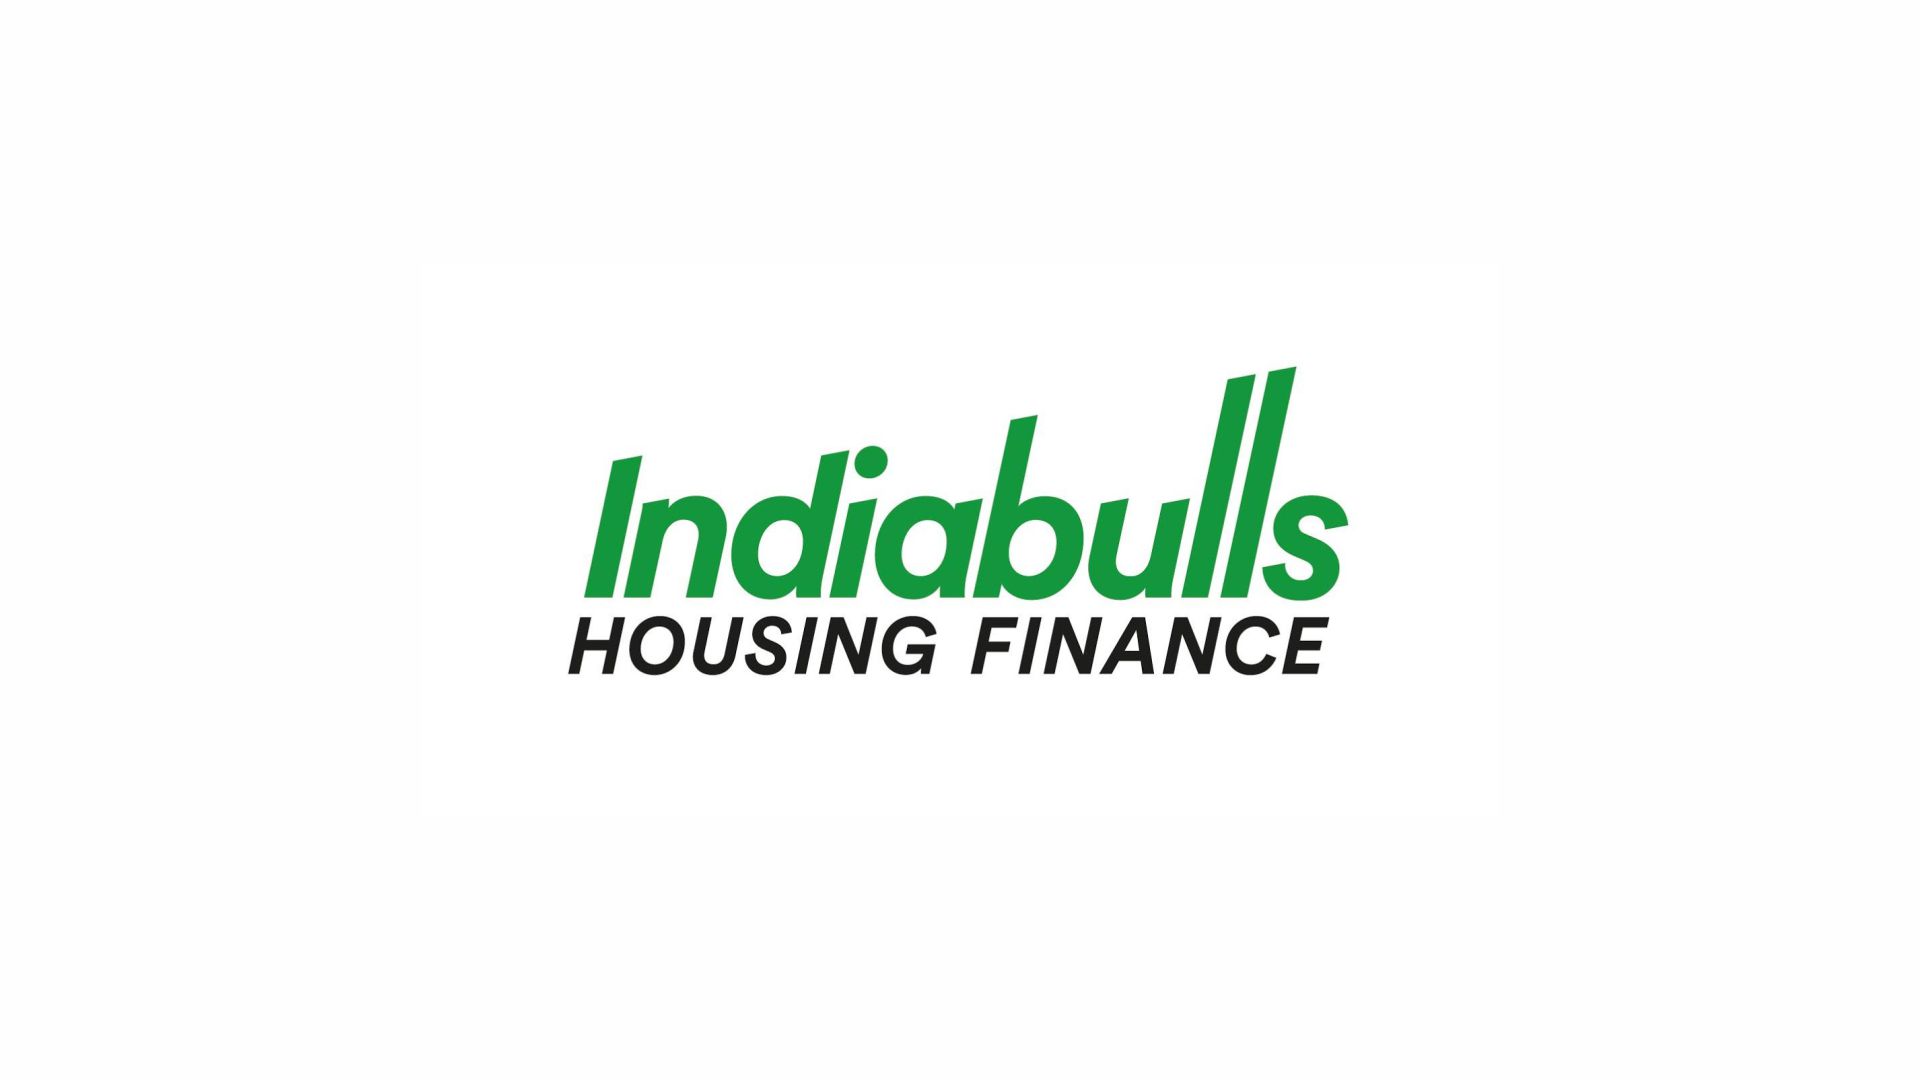 Indiabulls Housing Finance Limited announces Public Issue of Secured Redeemable Non-Convertible Debentures (NCDs)